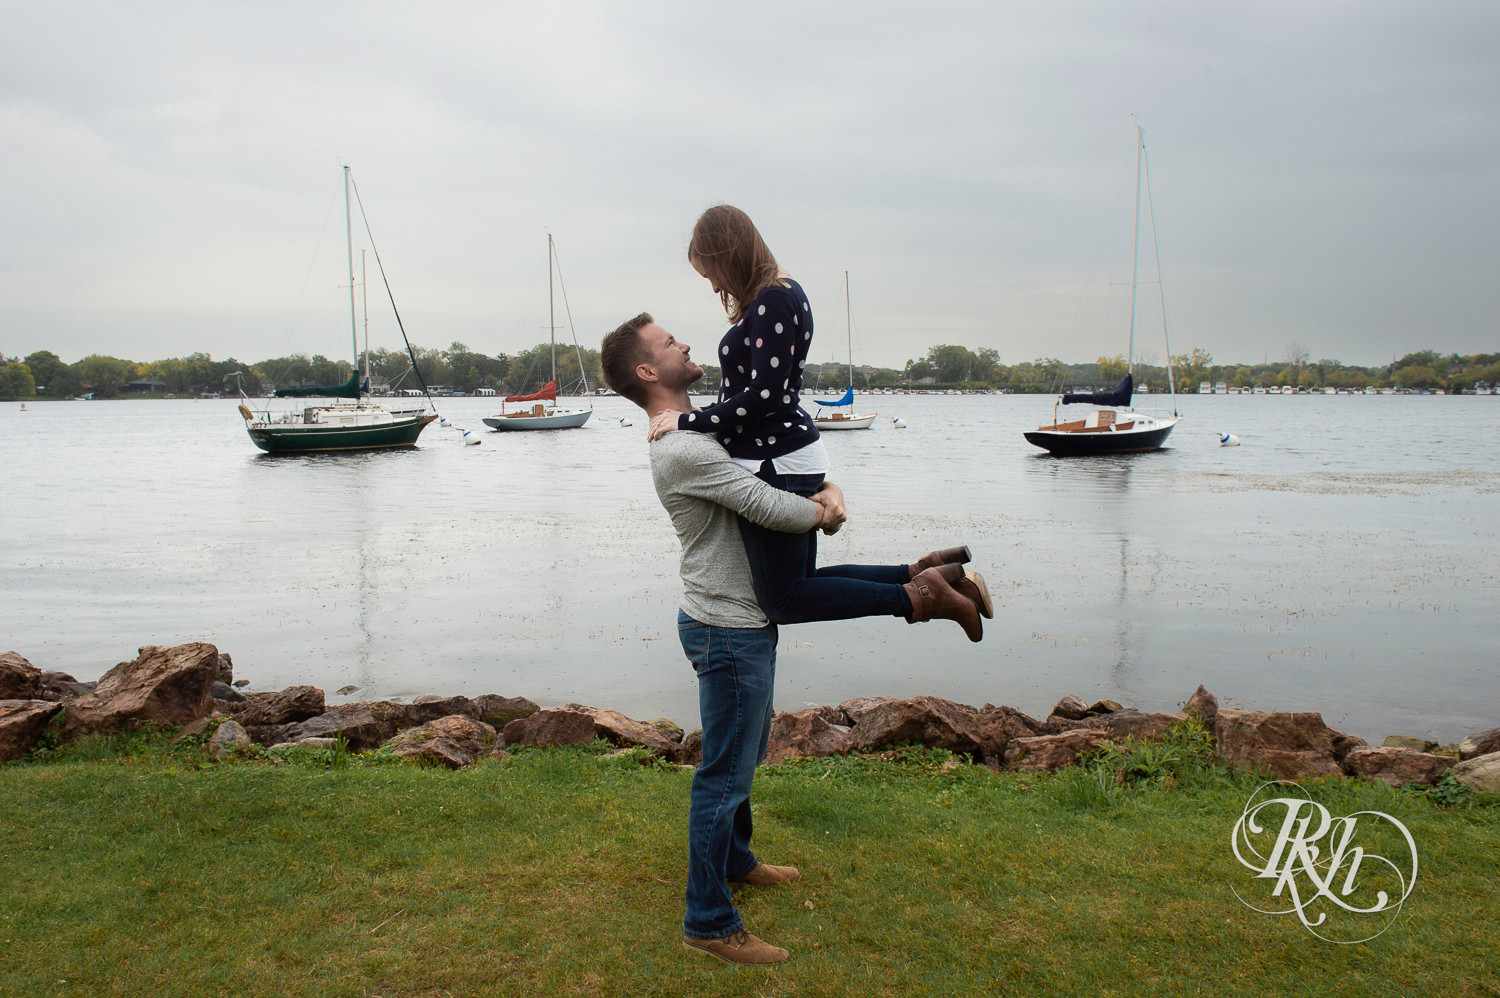 Man and woman in sweaters and jeans smile during rainy day engagement photos in Excelsior, Minnesota.